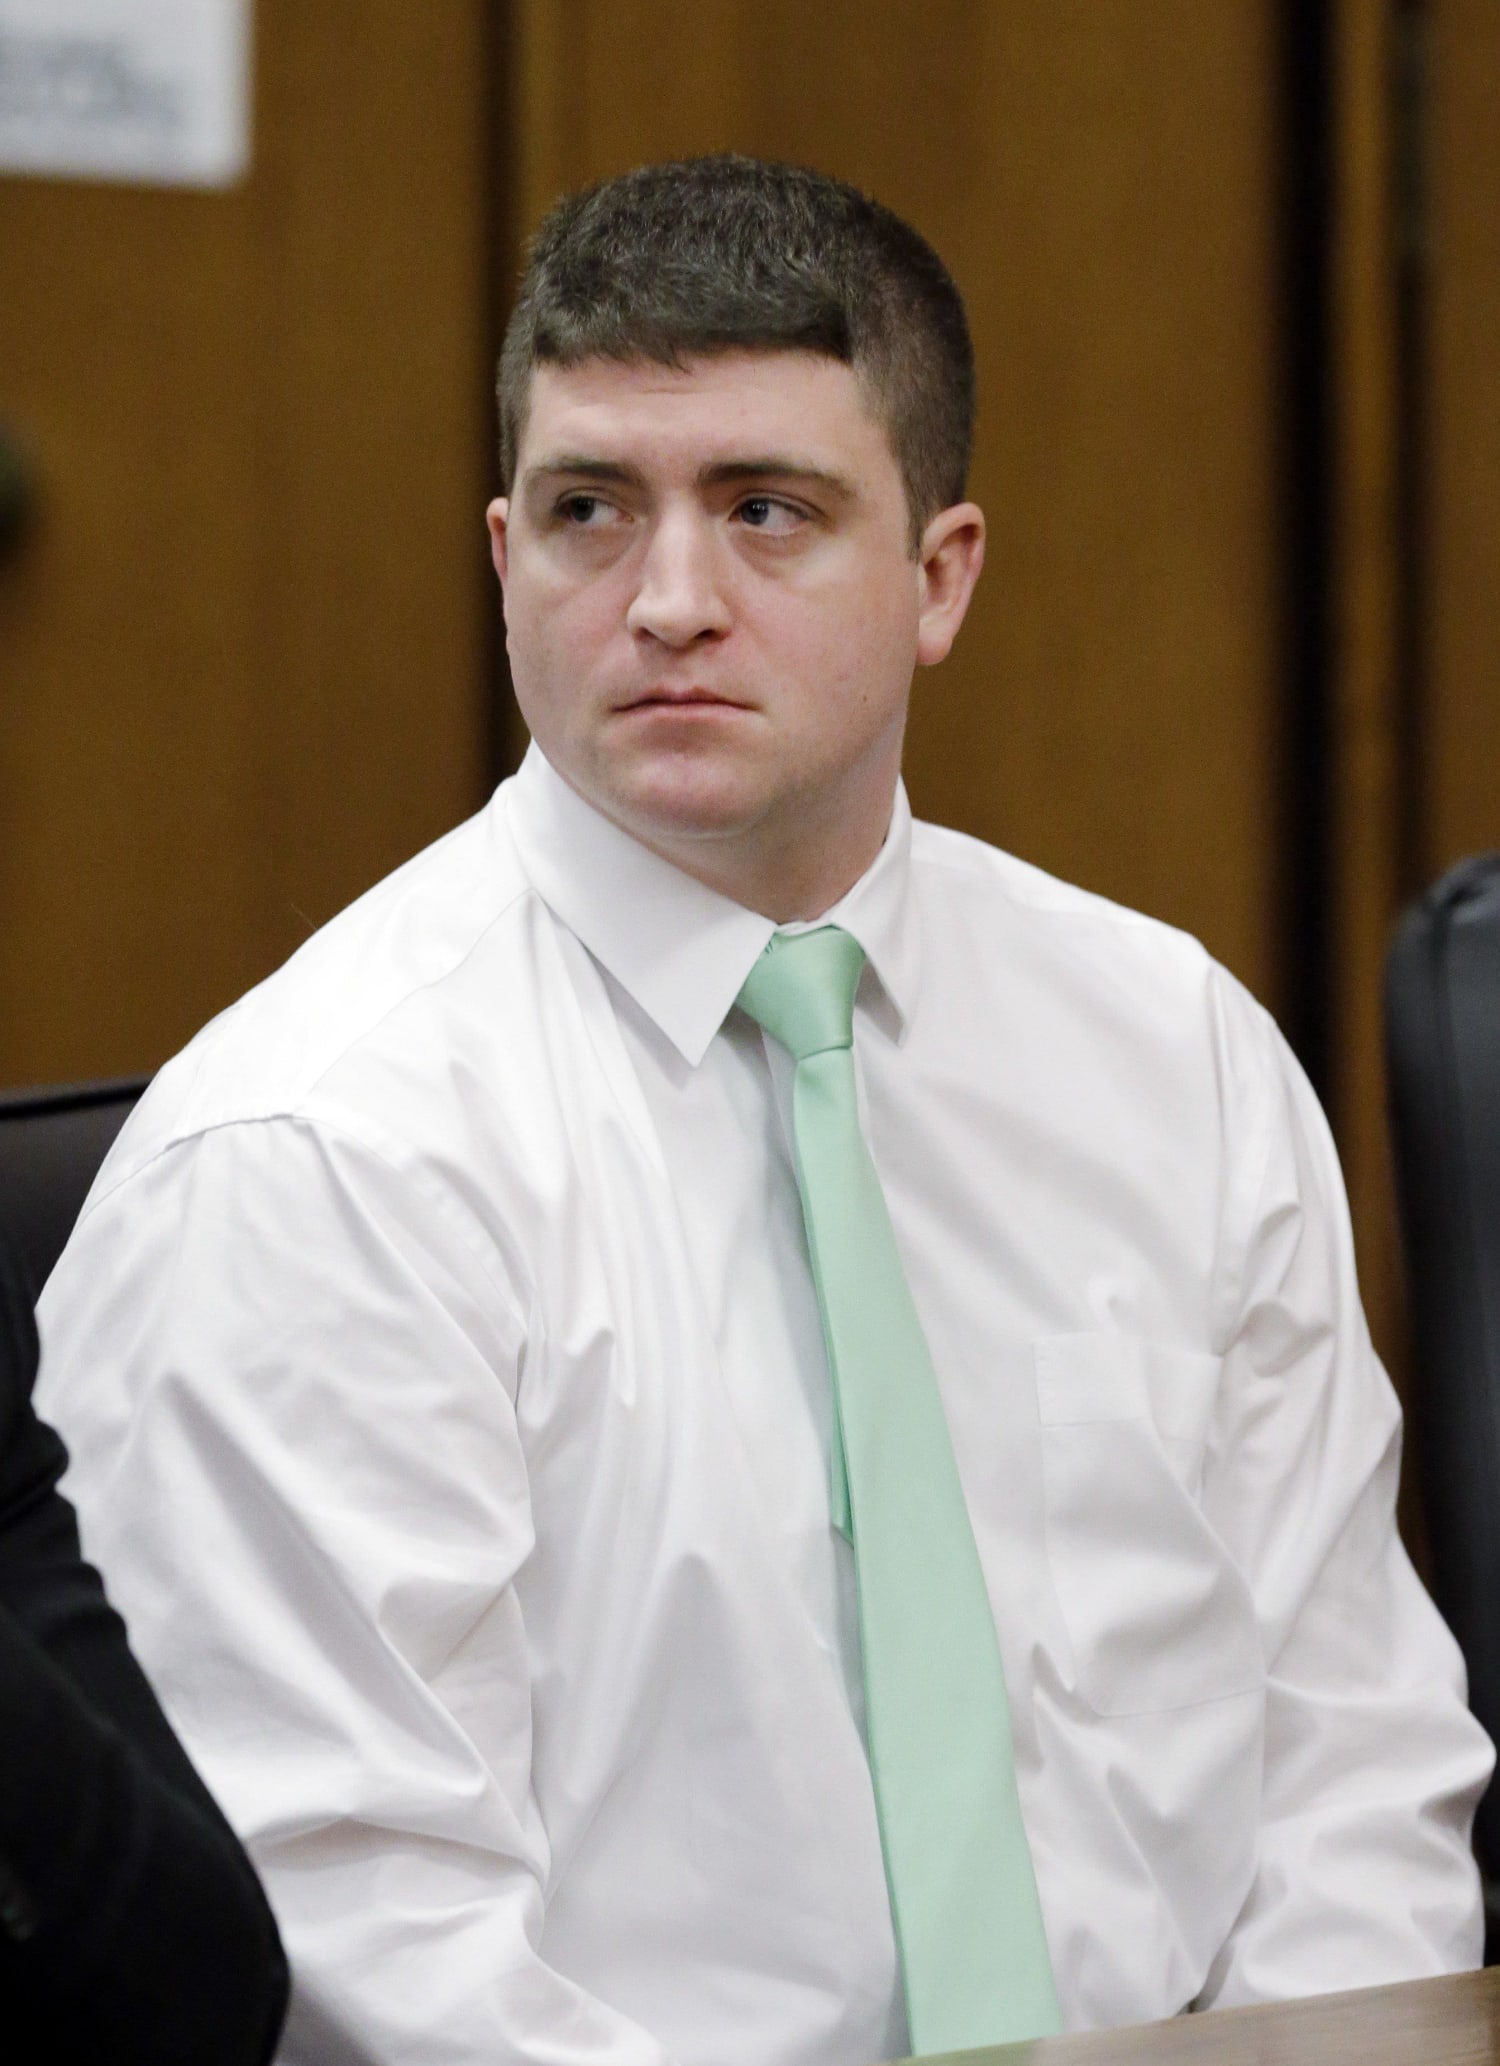 Cleveland Cop MICHAEL BRELO to Stand Trial for Voluntary.